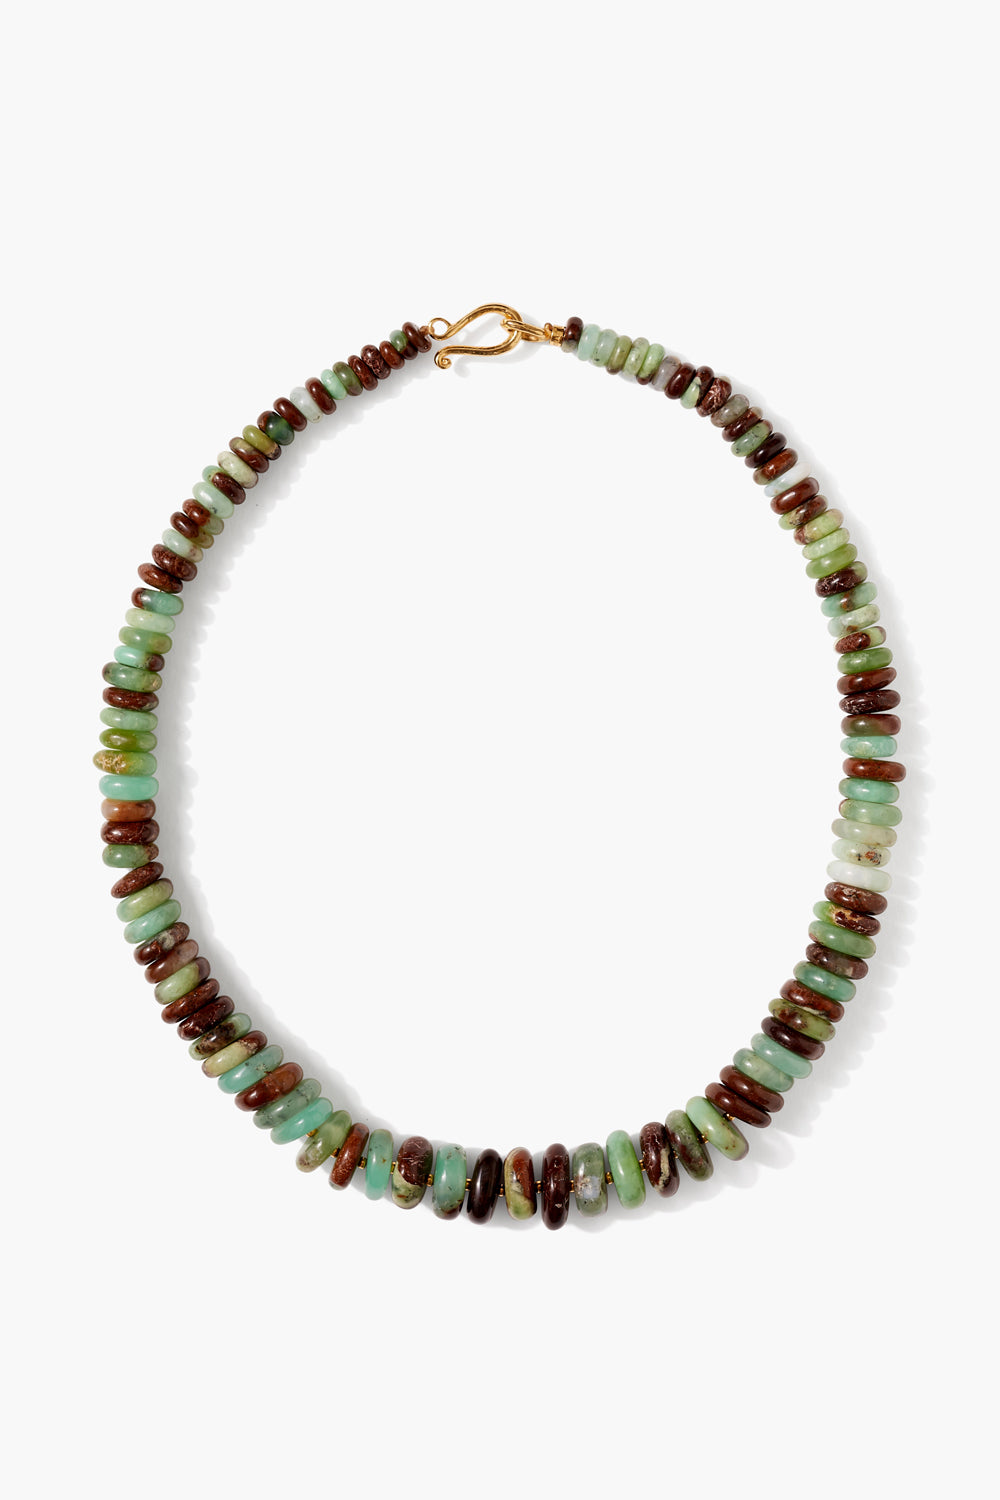 CHRYSOPRASE GRADUATED STONE NECKLACE - Kingfisher Road - Online Boutique